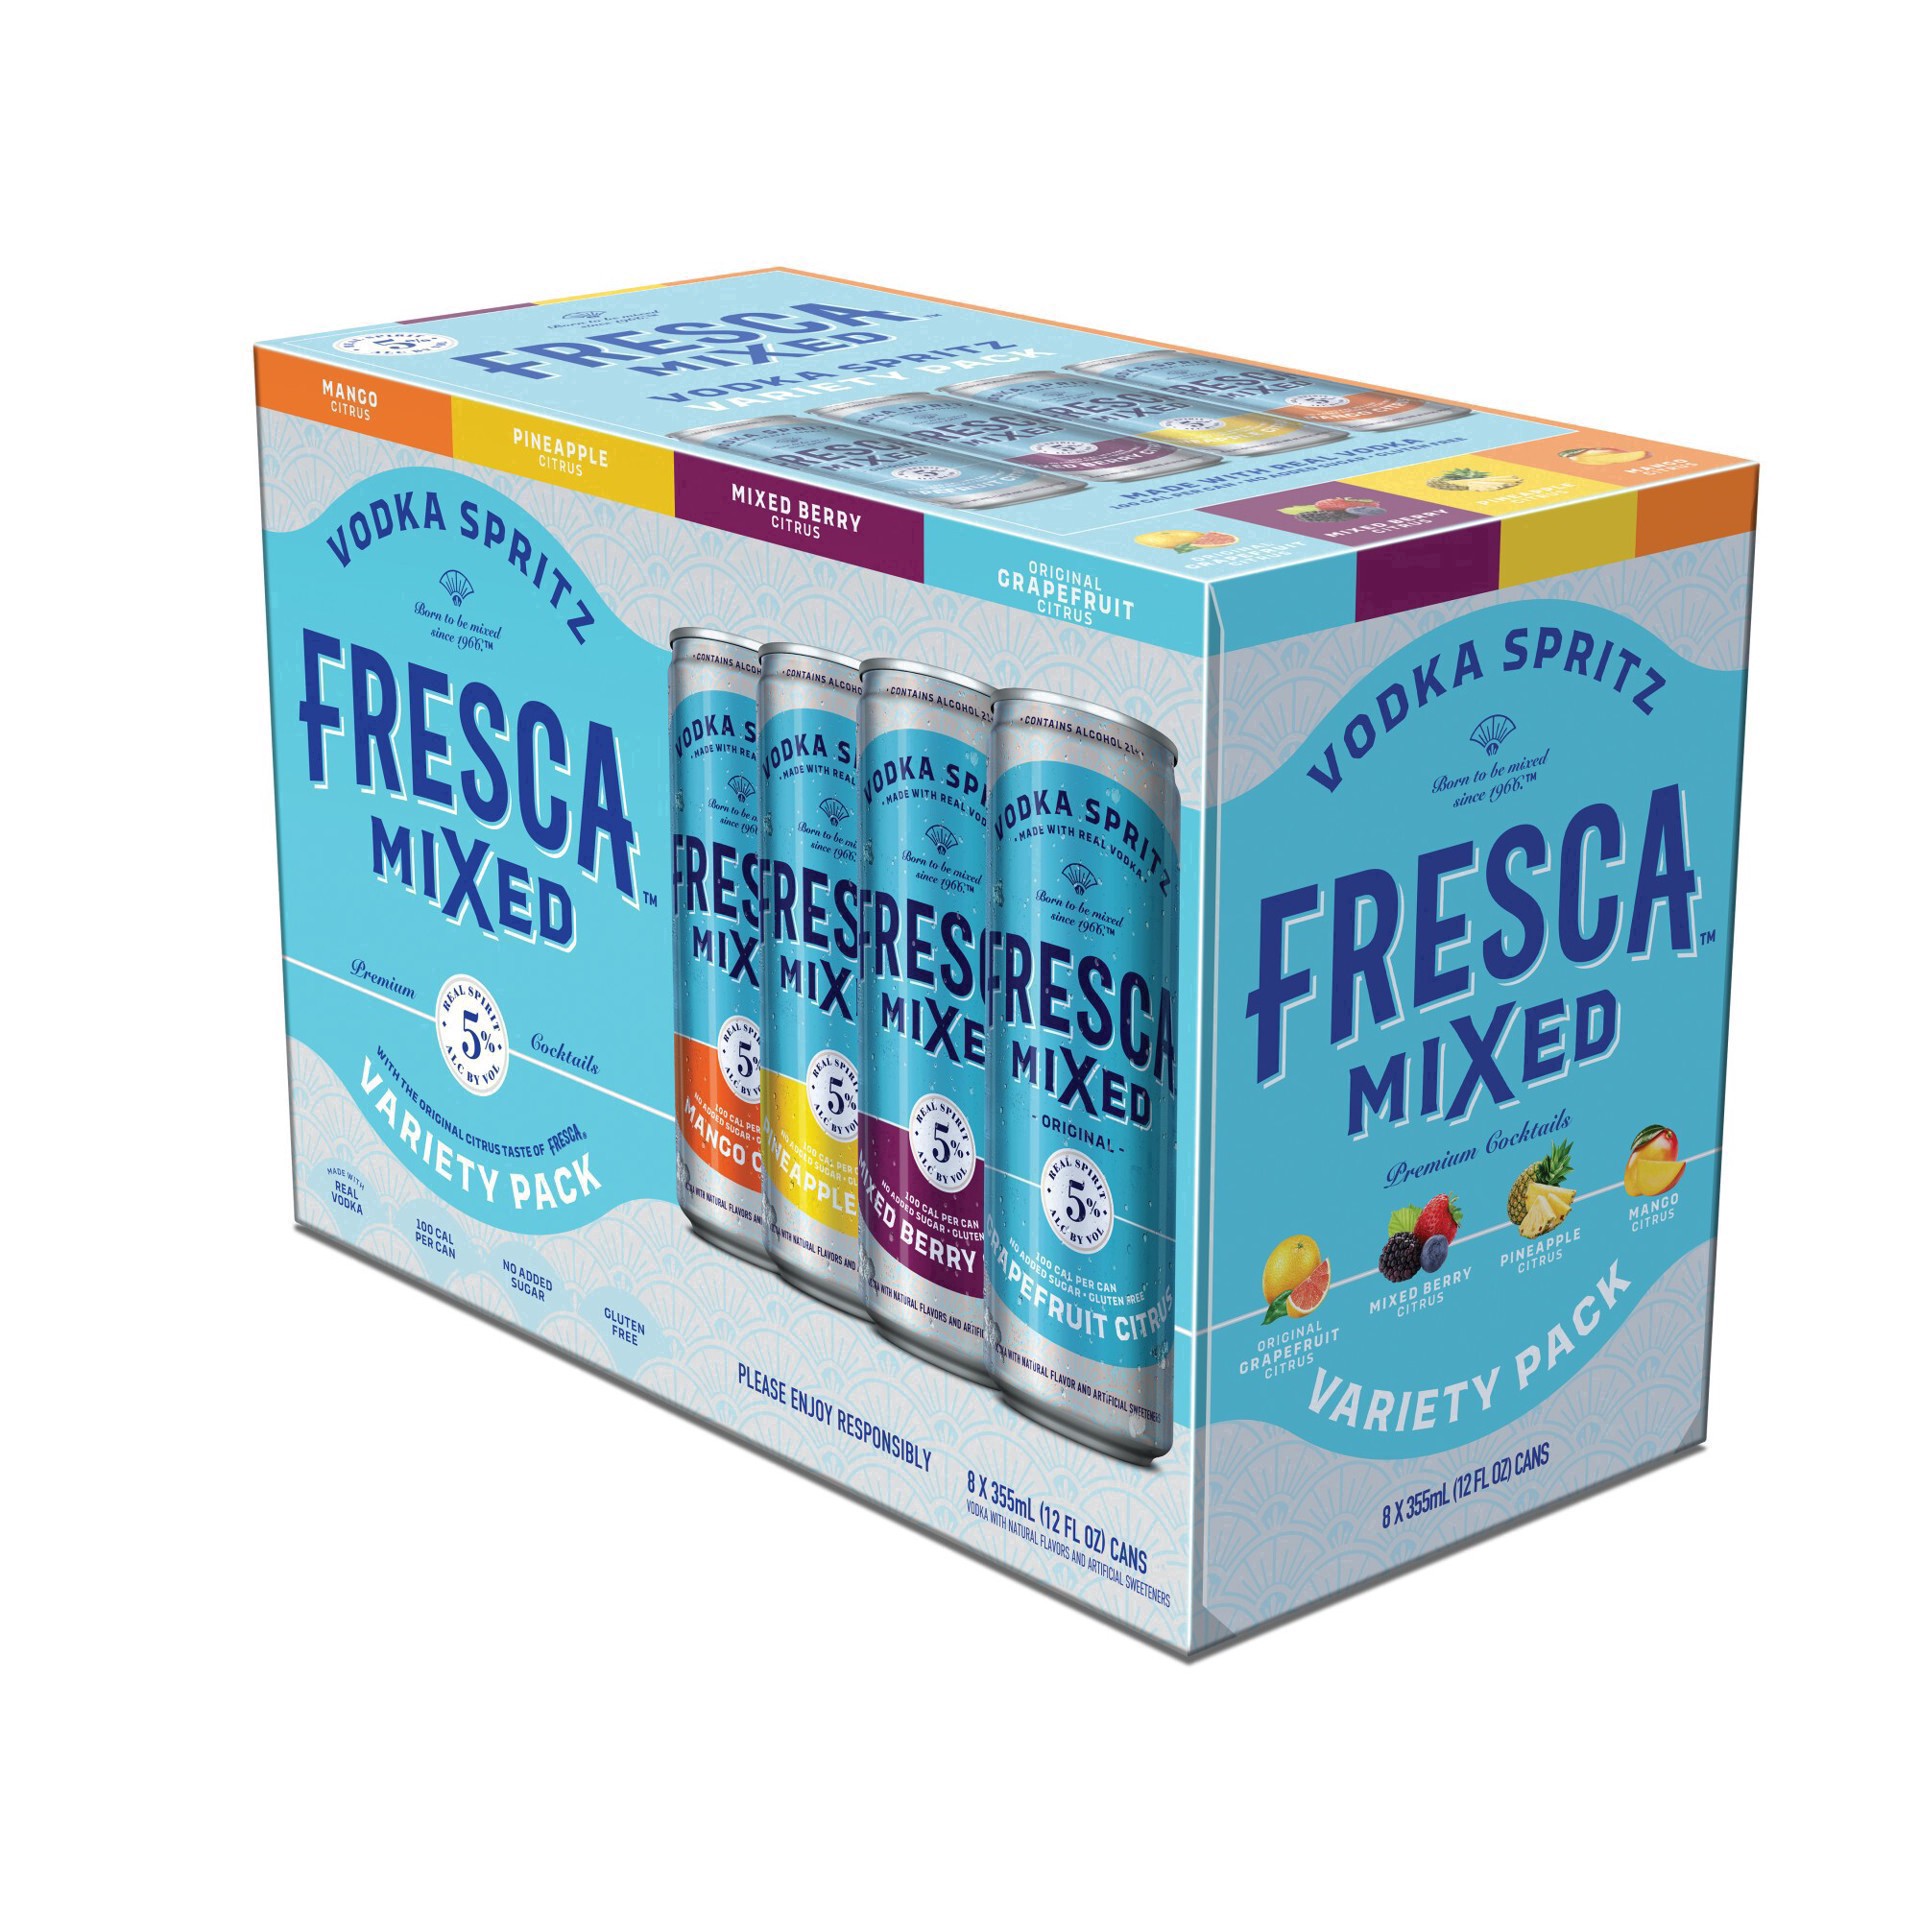 slide 6 of 15, Fresca Mixed Vodka Spritz Variety Pack Gluten-Free Canned Cocktail, 8 pk 12 fl oz Cans, 5% ABV, 8 ct; 12 oz